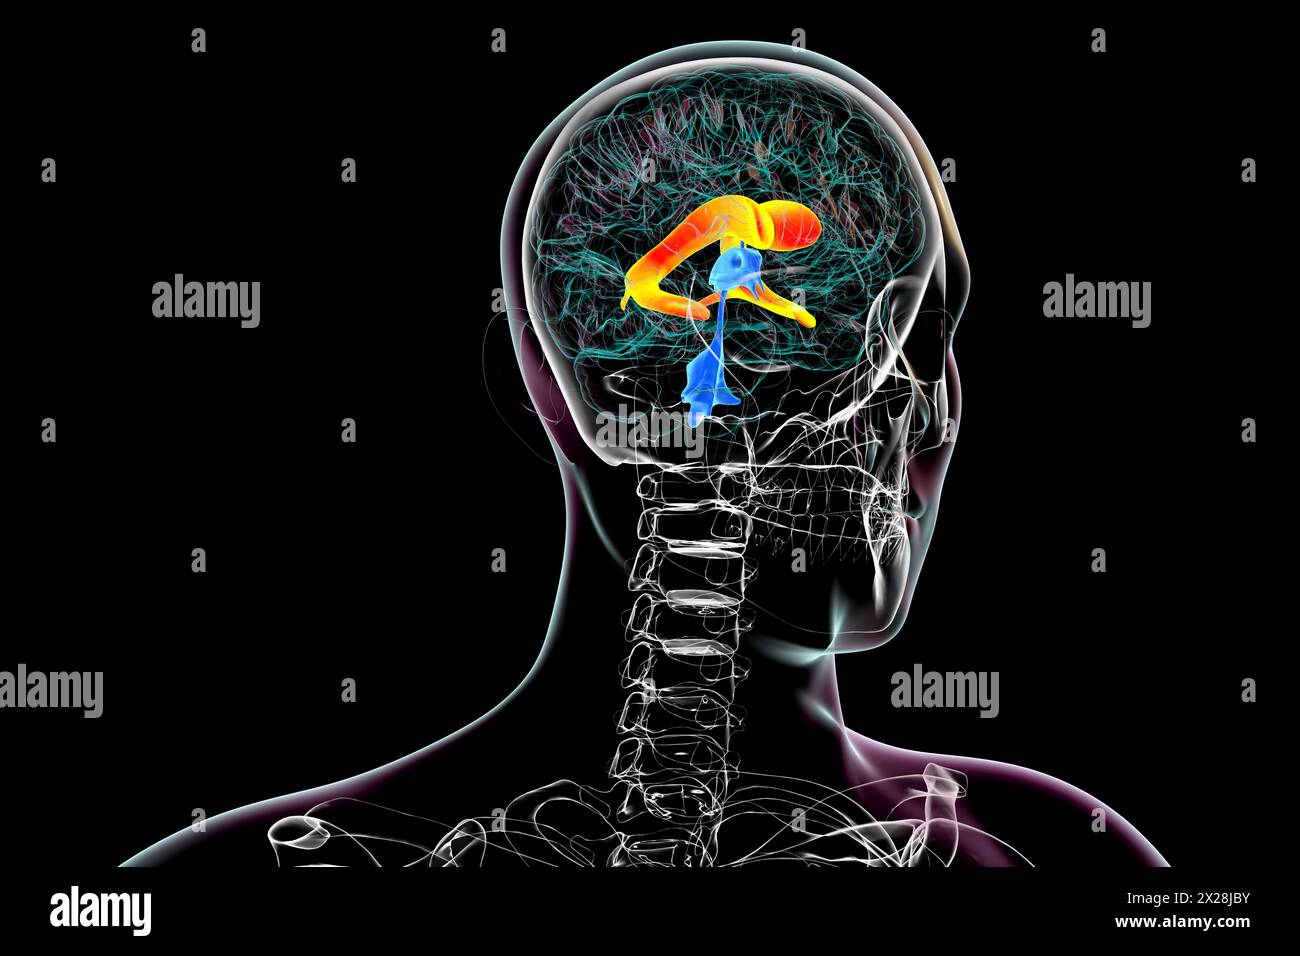 Lateral brain ventricles, illustration Stock Photo